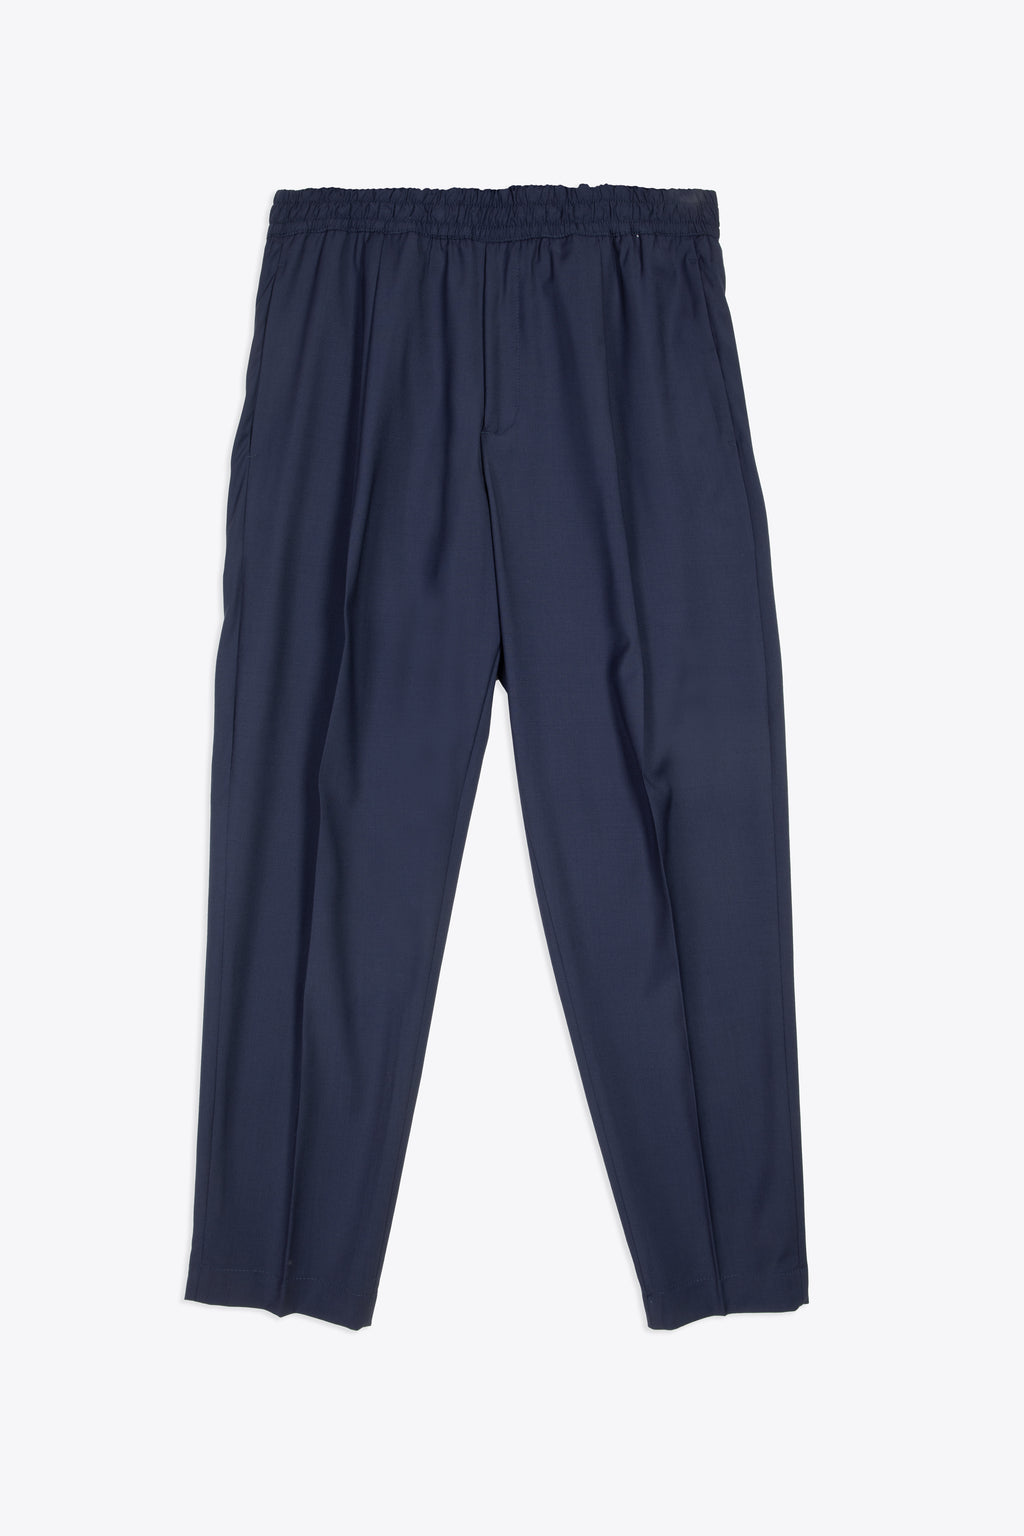 alt-image__Blue-wool-tailored-pant-with-elastic-waistband---Savoys